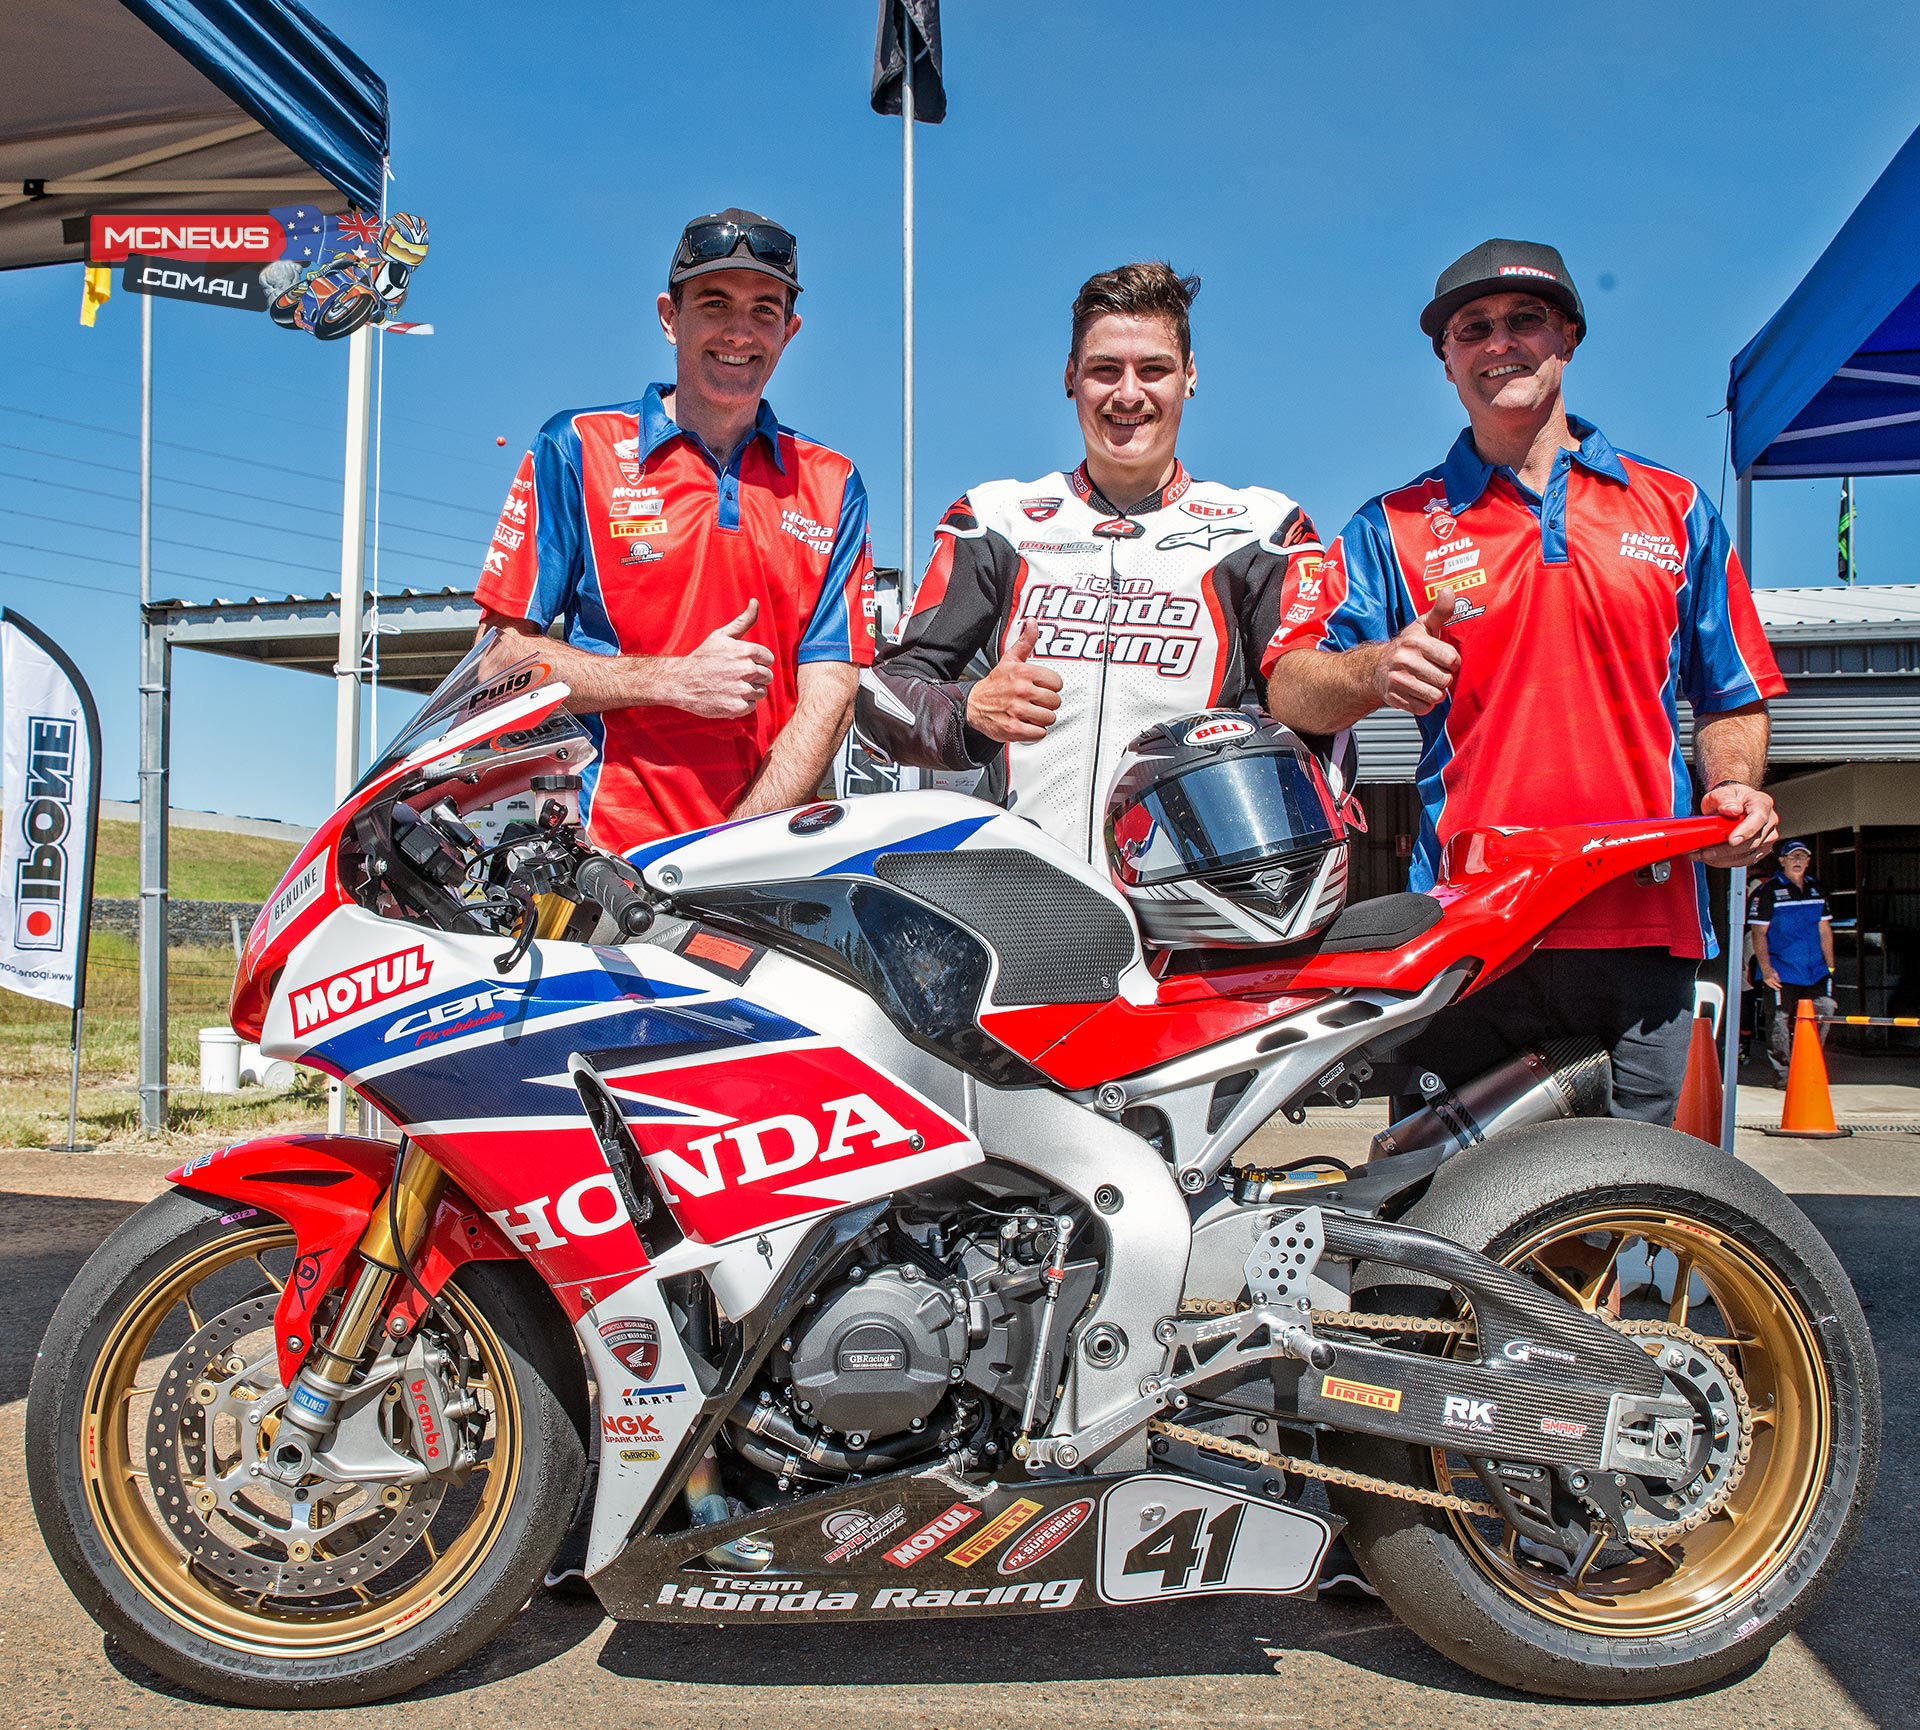 Aiden Wagner with mechanic Dan Williams and Team Honda boss Paul Free after taking out race one on his Superbike debut at Sydney Motorsports Park earlier this year. Wagner was offered a ride with Team Honda for the remainder of 2015 but elected to go overseas